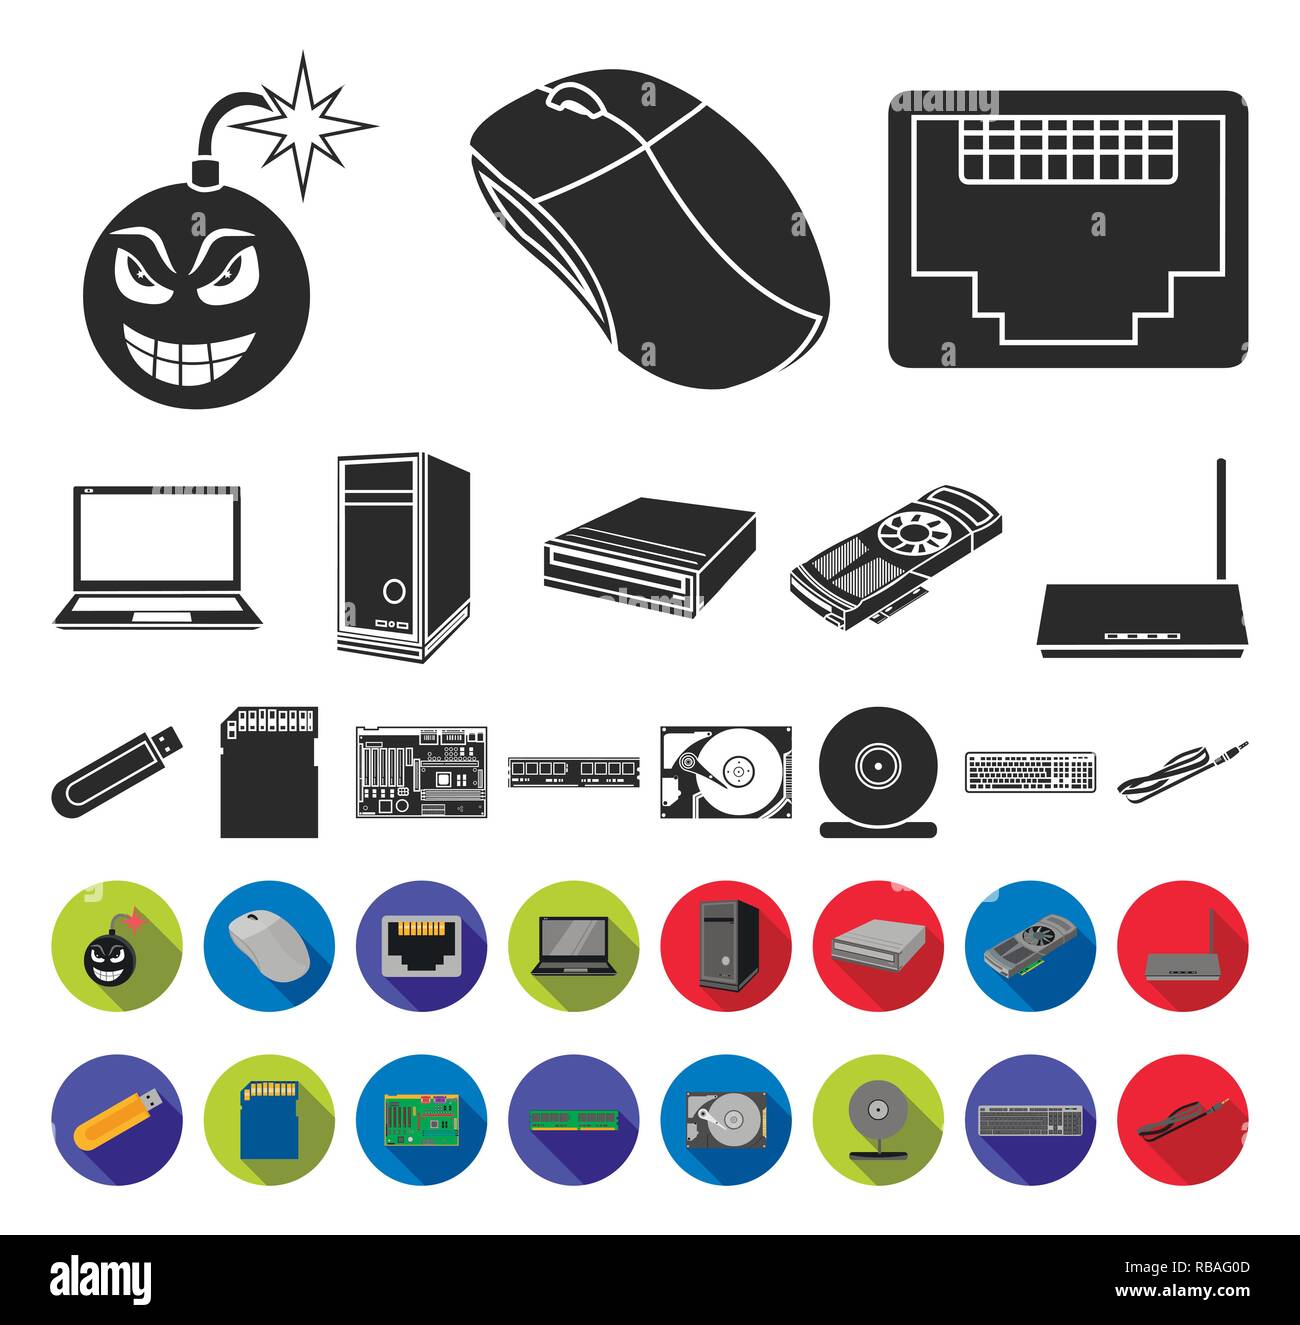 impuls Akkumulerede Kina accessories,accessory,art,black,flat,bus,card,case,collection,computer ,design,digital,disc,disk,drive,equipment,graphics,hard,icon,illustration,internet,isolated,jack,keyboard,laptop, logo,memory,motherboard,mouse,network,optical,personal,plug ...